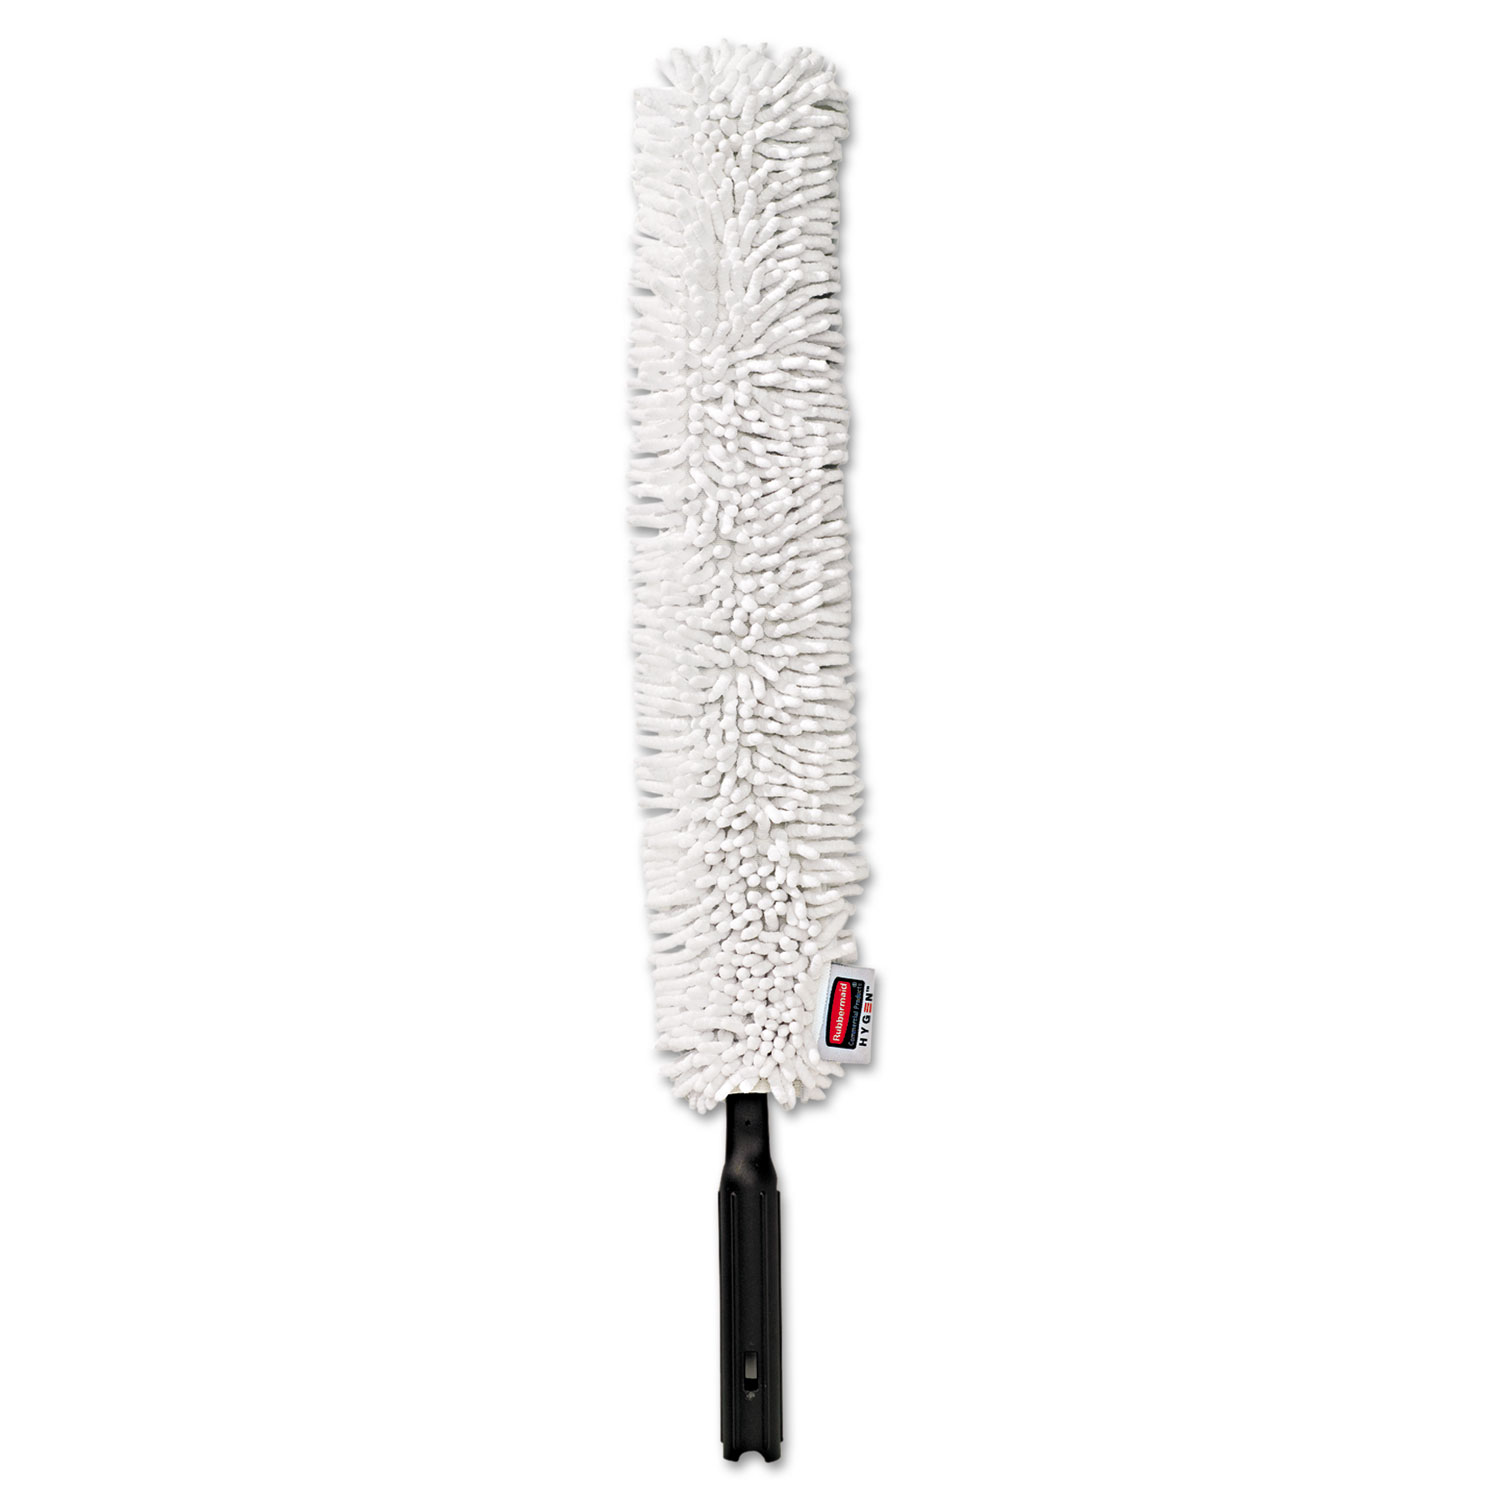  Rubbermaid Commercial HYGEN FGQ85200WH00 HYGEN Quick-Connect Flexible Dusting Wand, 28 3/8 Handle (RCPQ852WHI) 